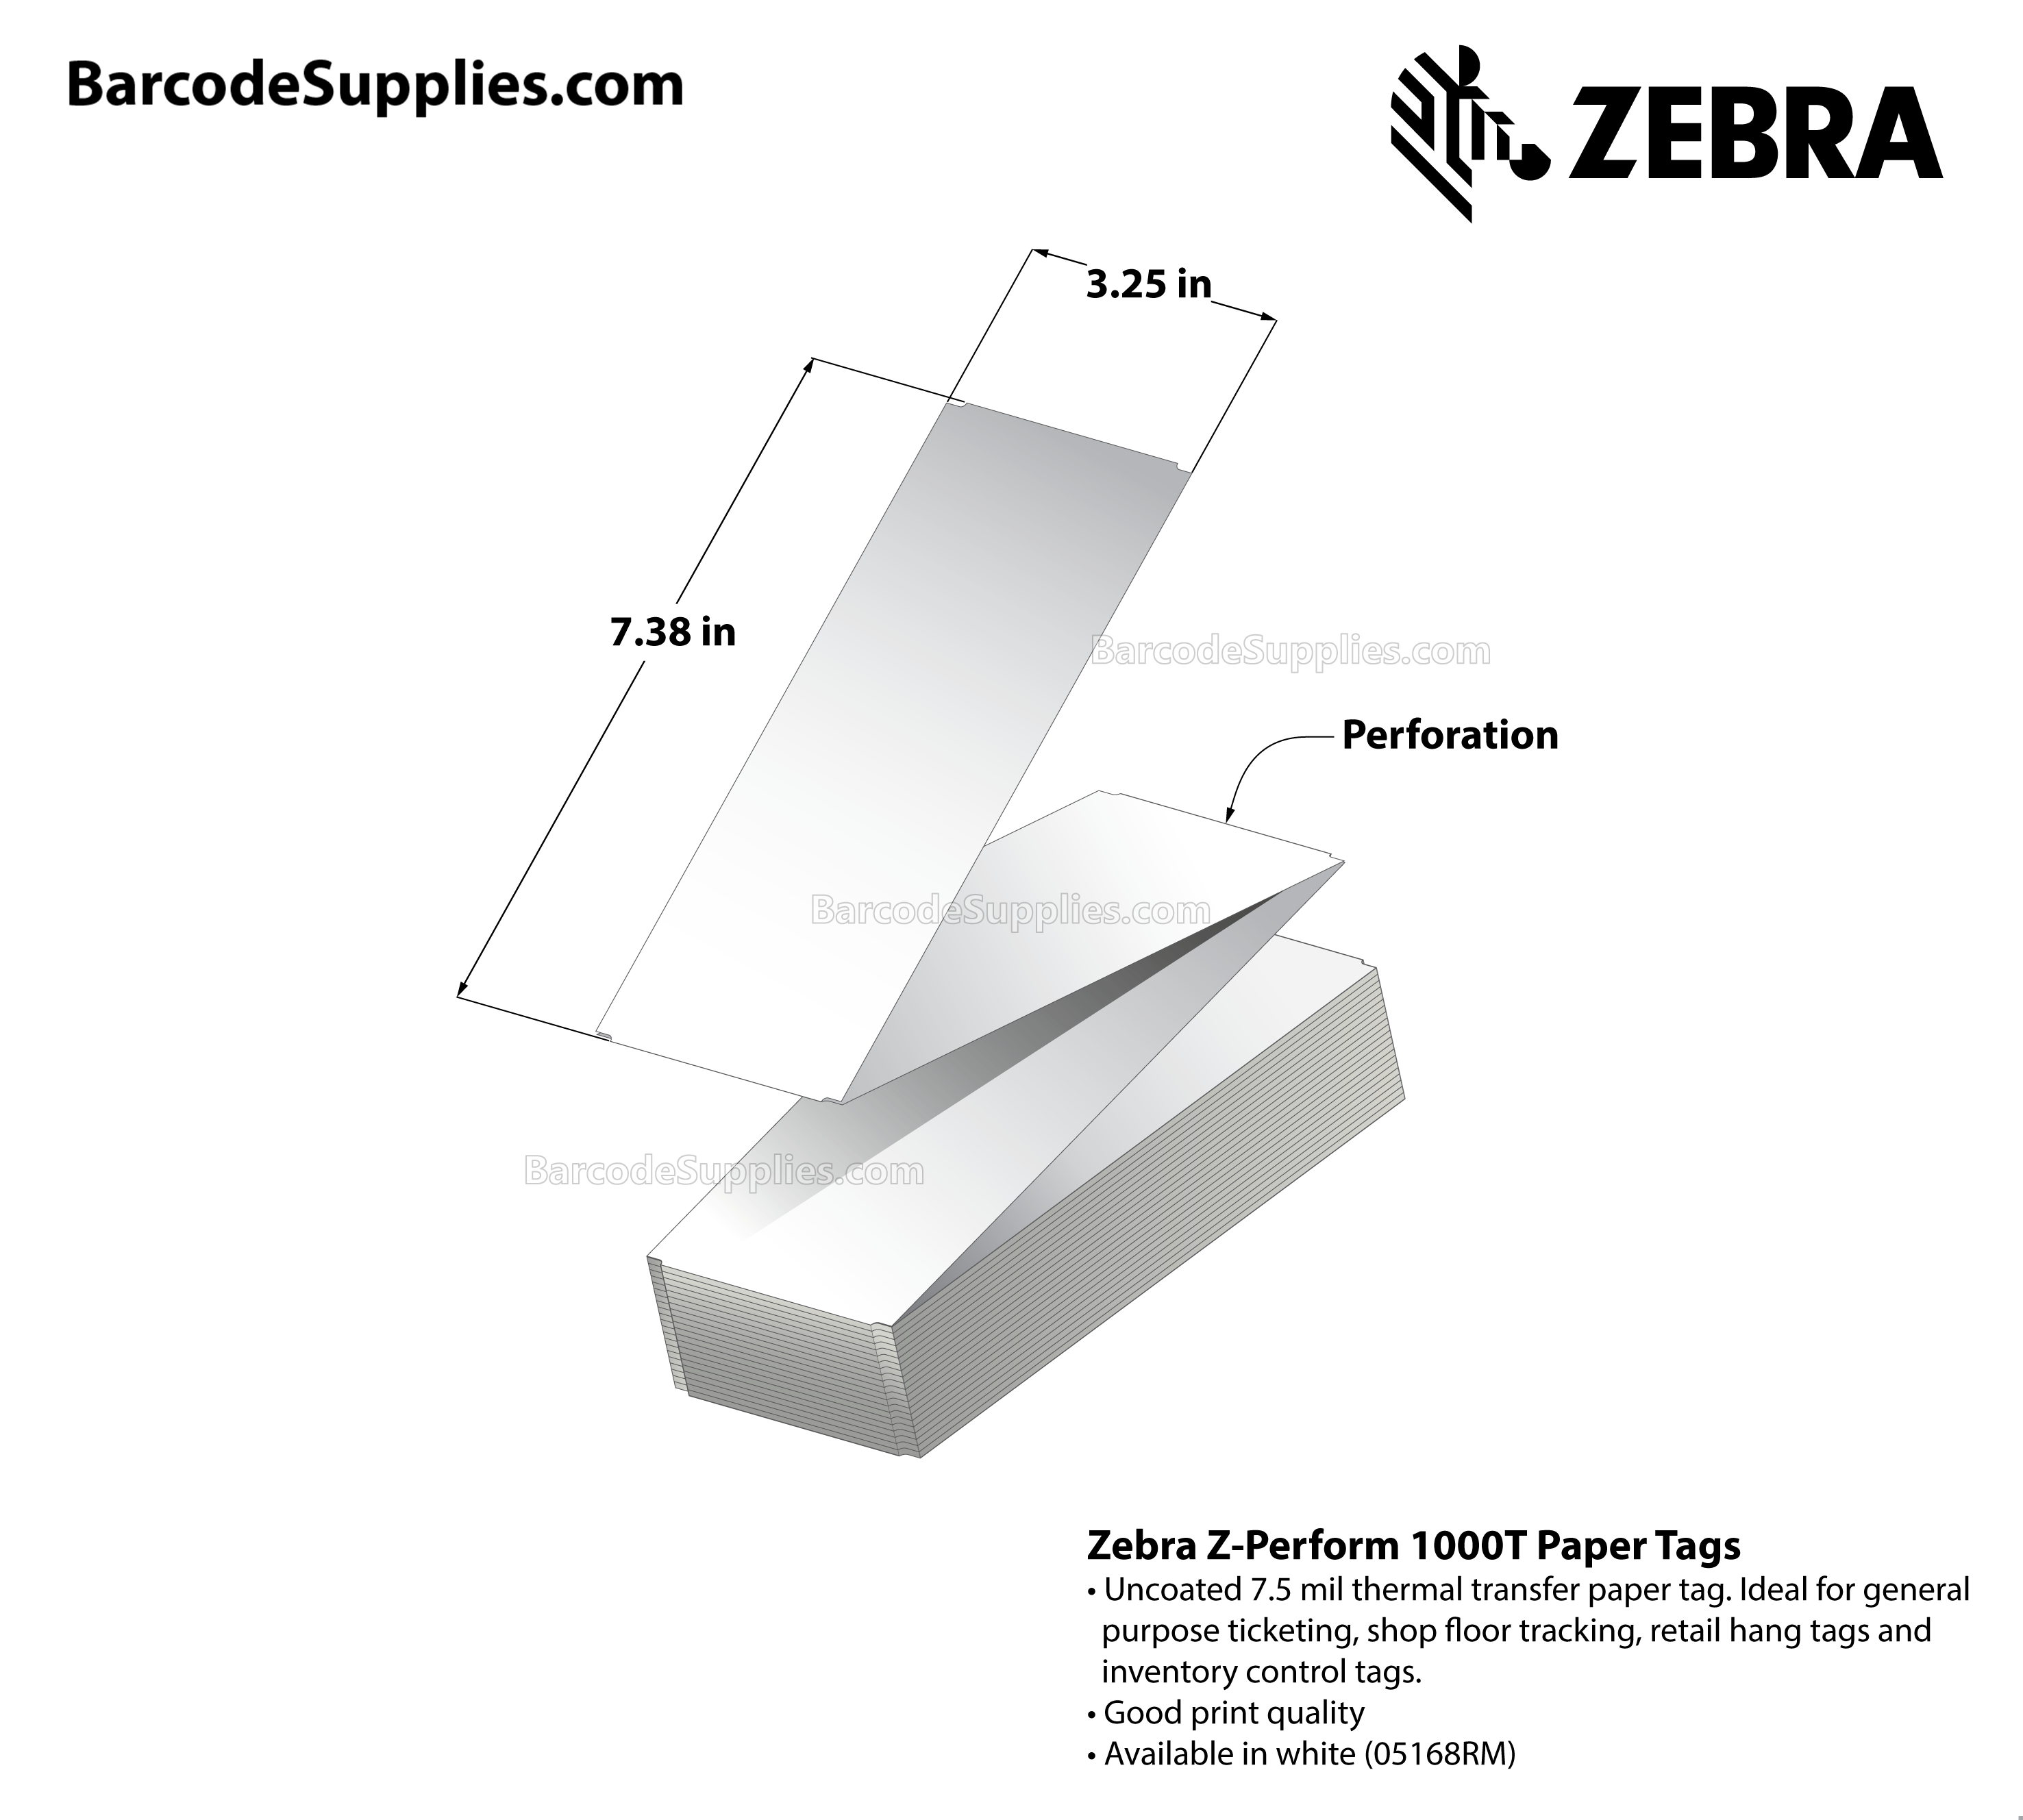 3.25 x 7.38 Thermal Transfer White Z-Perform 1000T 7.5 mil Tag (Fanfold) Tags With No Adhesive - Contains side sensing notch - Perforated - 860 Tags Per Stack - Carton Of 4 Stacks - 3440 Tags Total - MPN: 67850